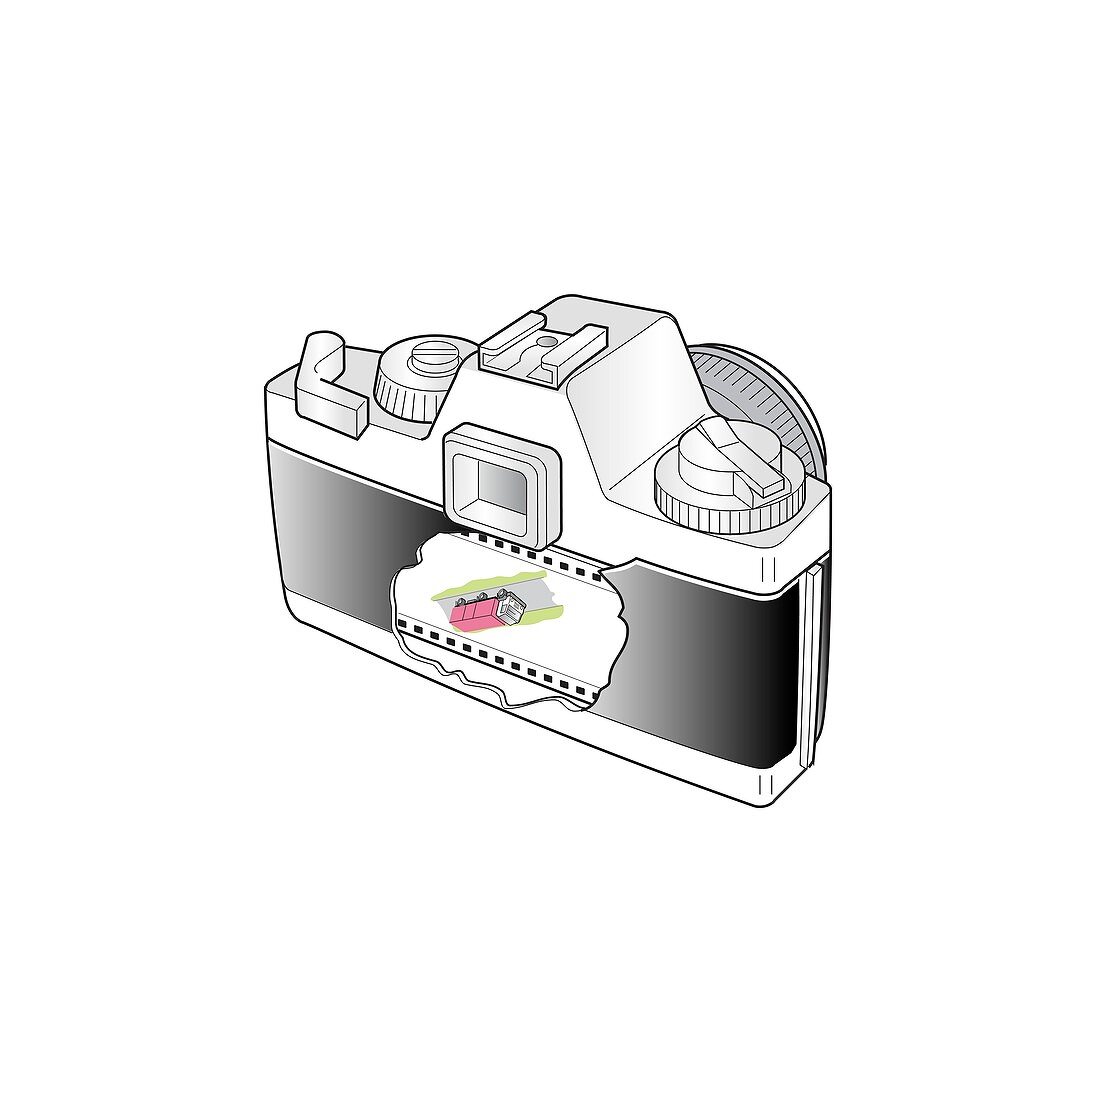 Camera with inverted image, cutaway artwork